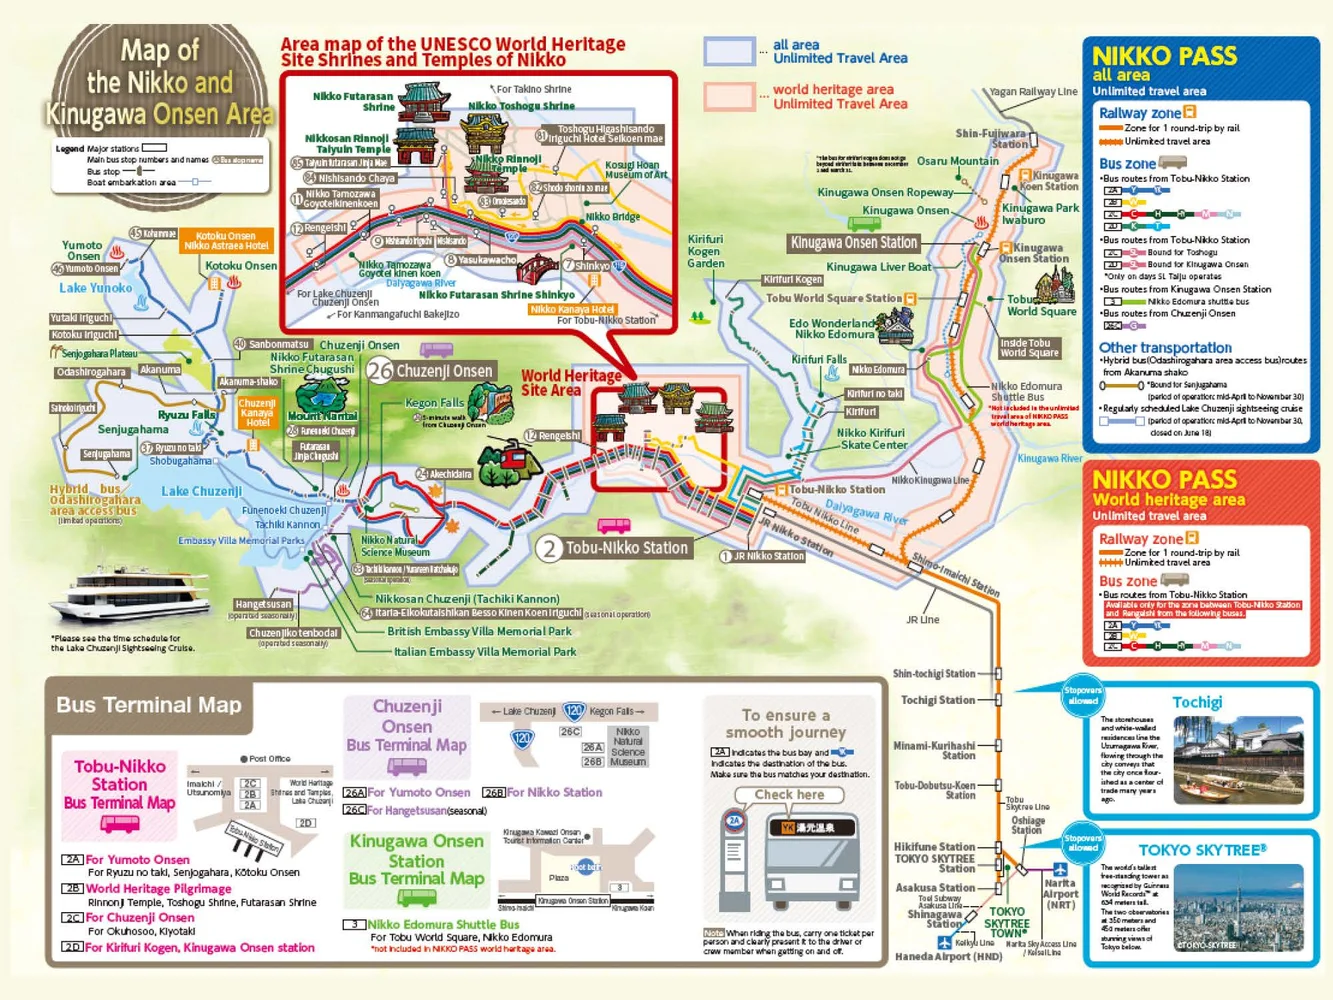 A Nikko map that shows the coverage of the 2-Day Nikko World Heritage Area Pass and 4-Day Nikko All Area Pass